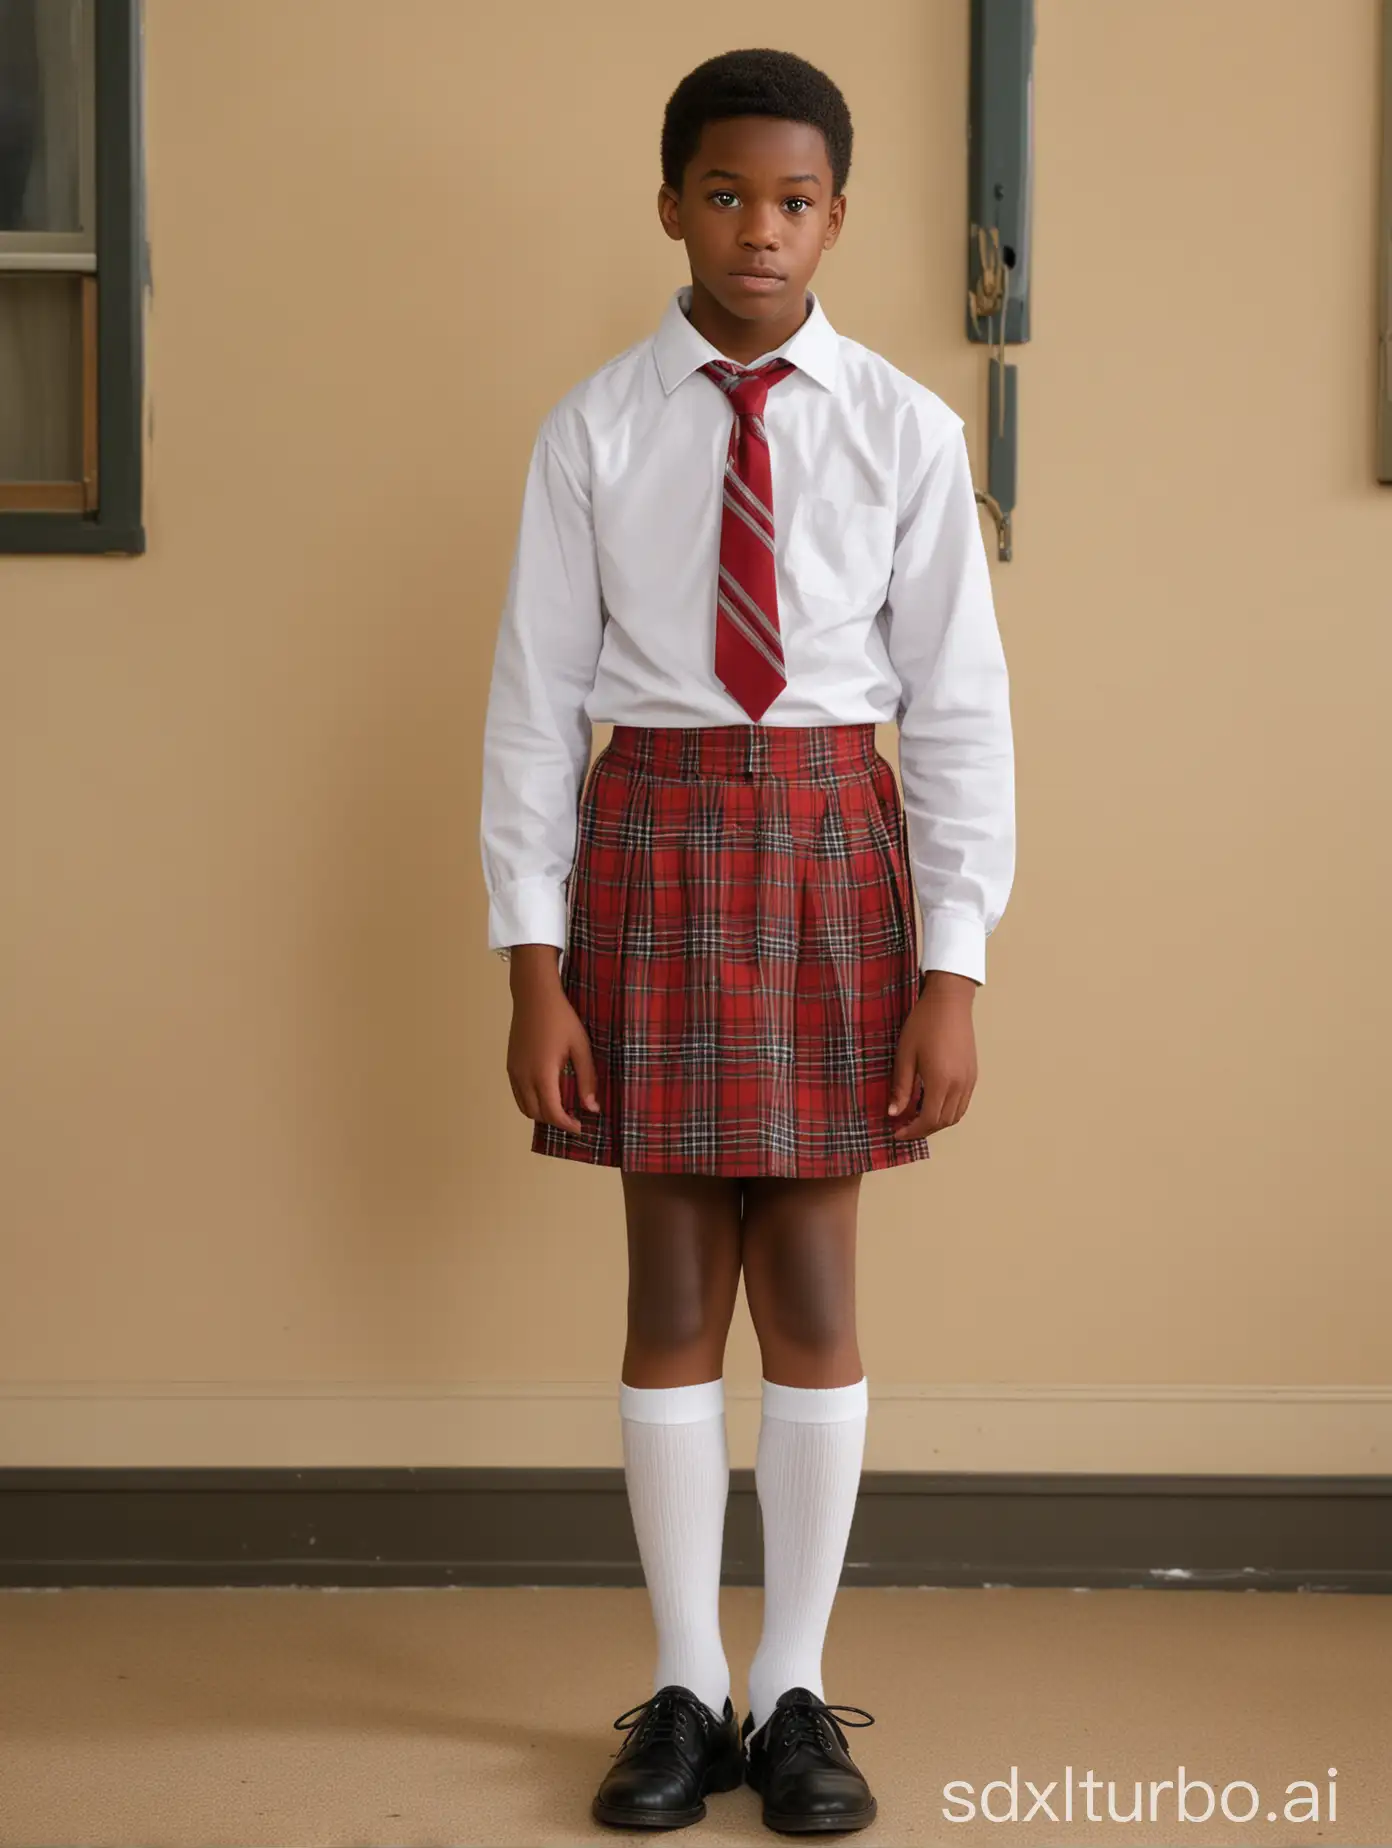 Digital photography of a nervous cute 17-year-old African American boy, forced to stand in a traditional Catholic school uniform with plaid skirt and white pantyhose, a black boy, with a cute face (gender role reversal)